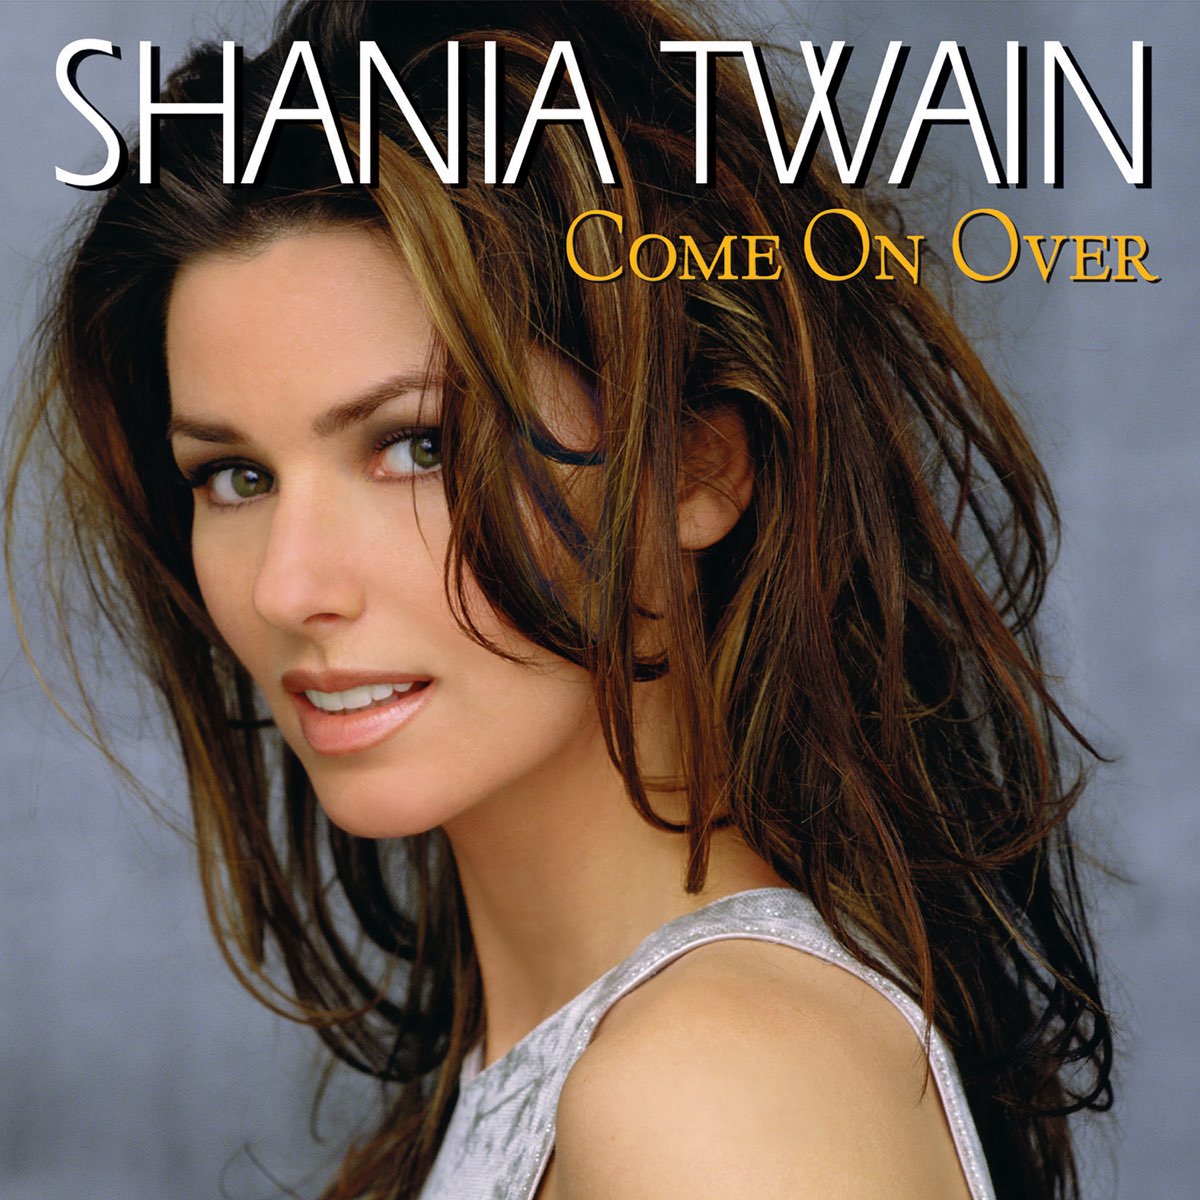 Who Did Mutt Lange Leave Shania Twain For